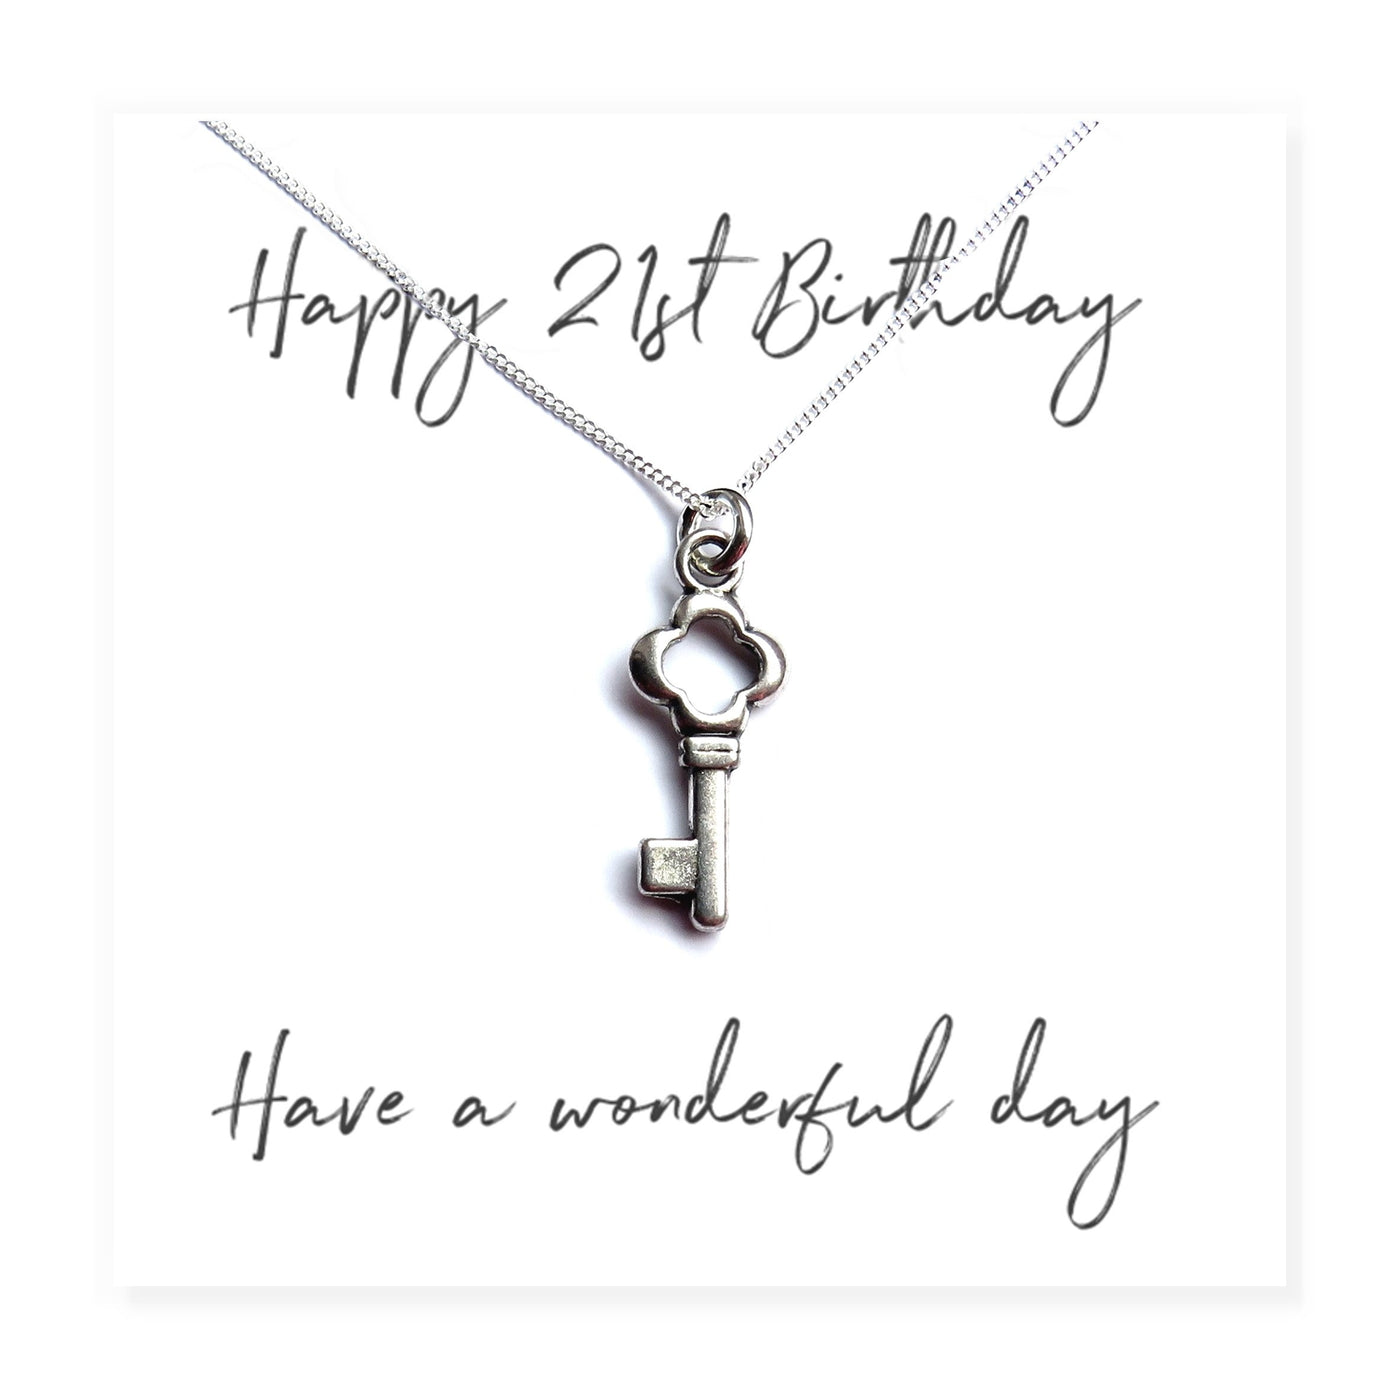 Happy 21st Birthday Necklace & Message Card